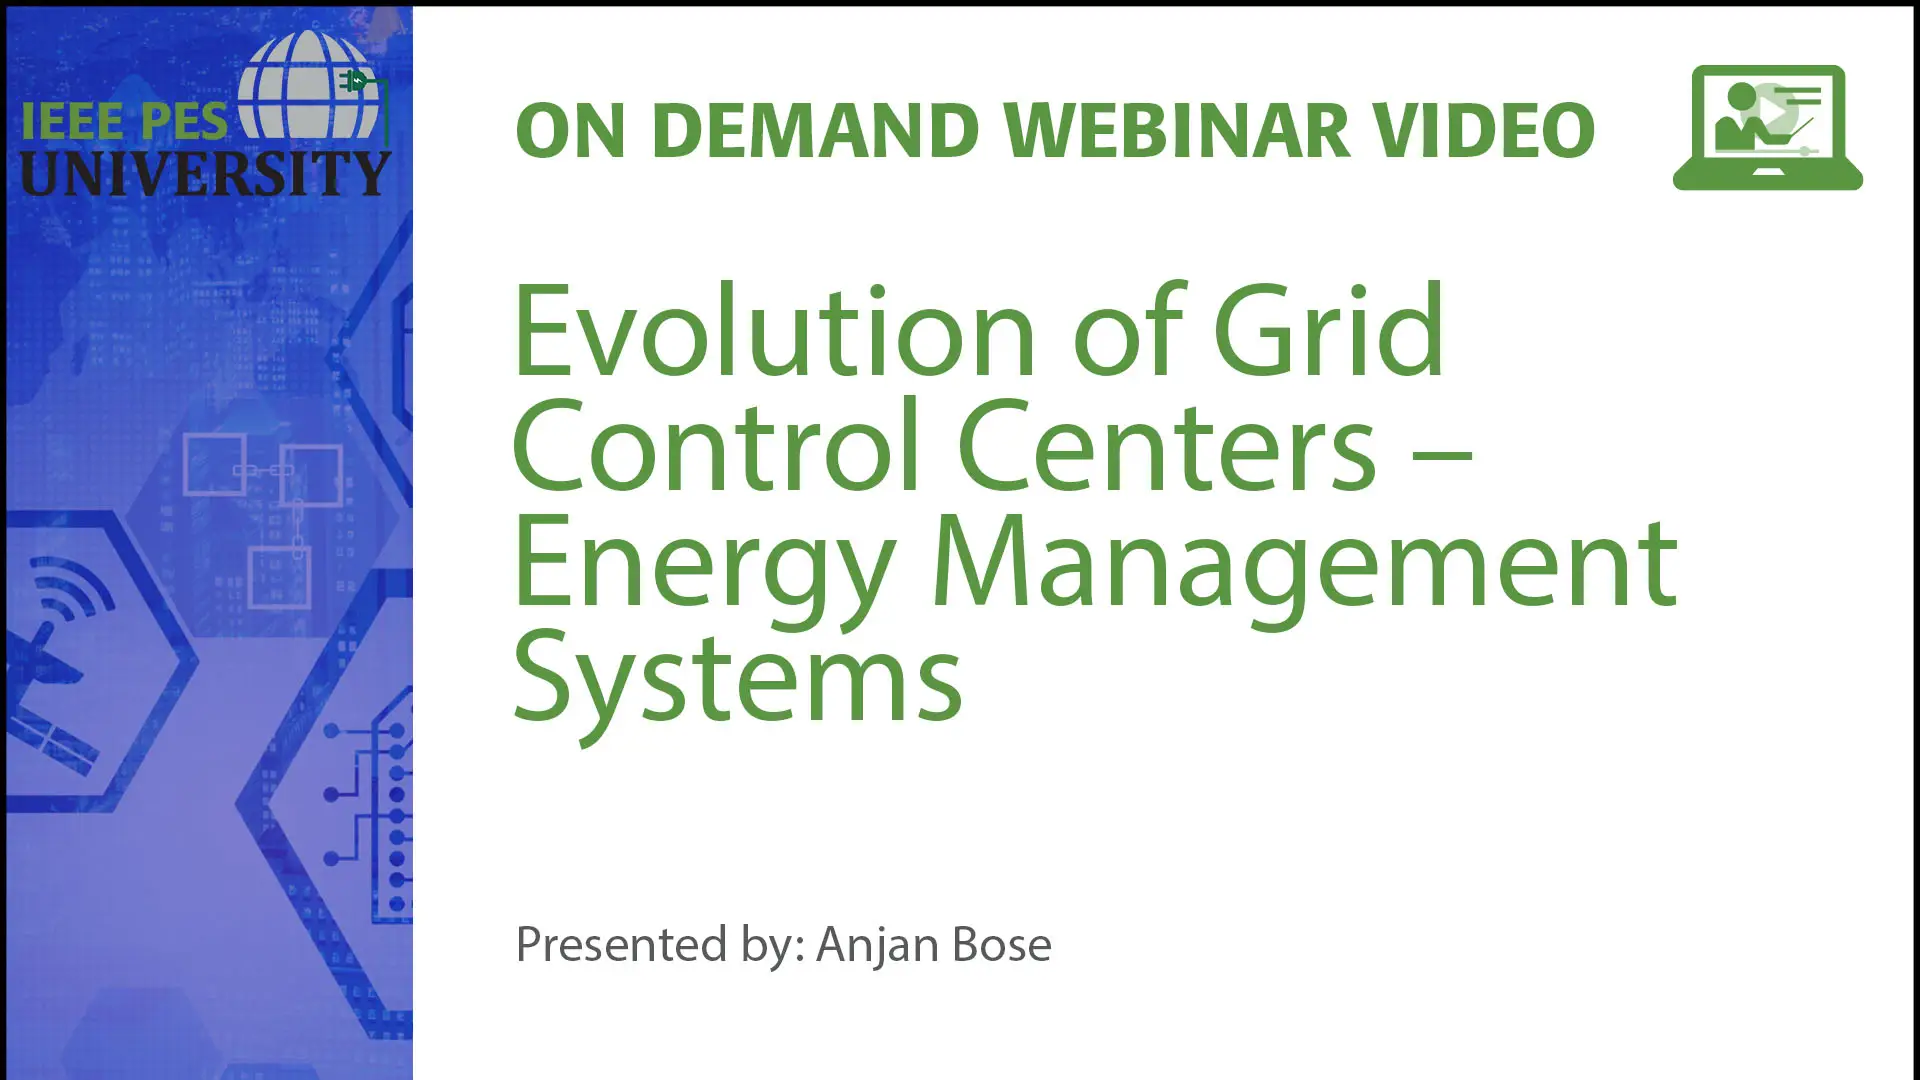 Evolution of Grid Control Centers – Energy Management Systems (Video)